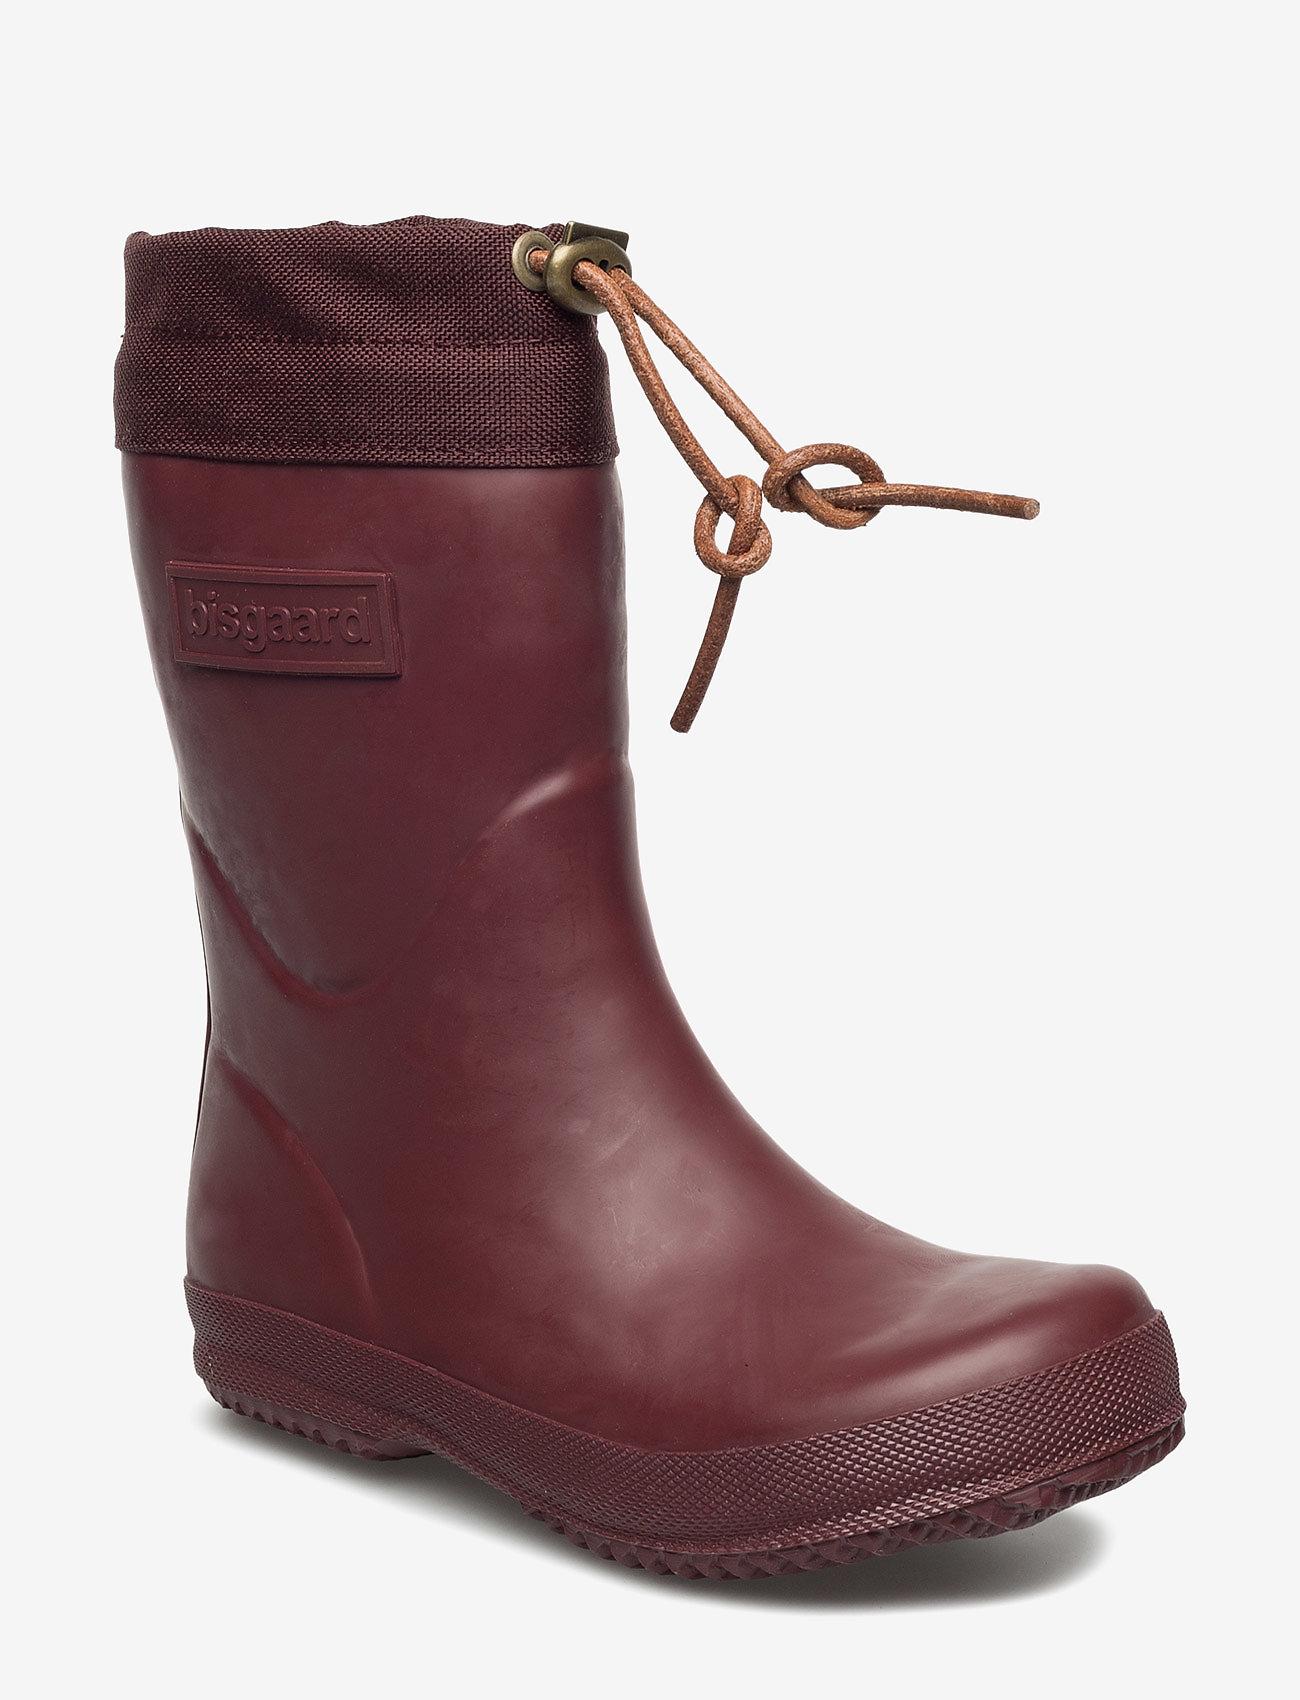 Bisgaard - bisgaard thermo - lined rubberboots - bordeaux - 0